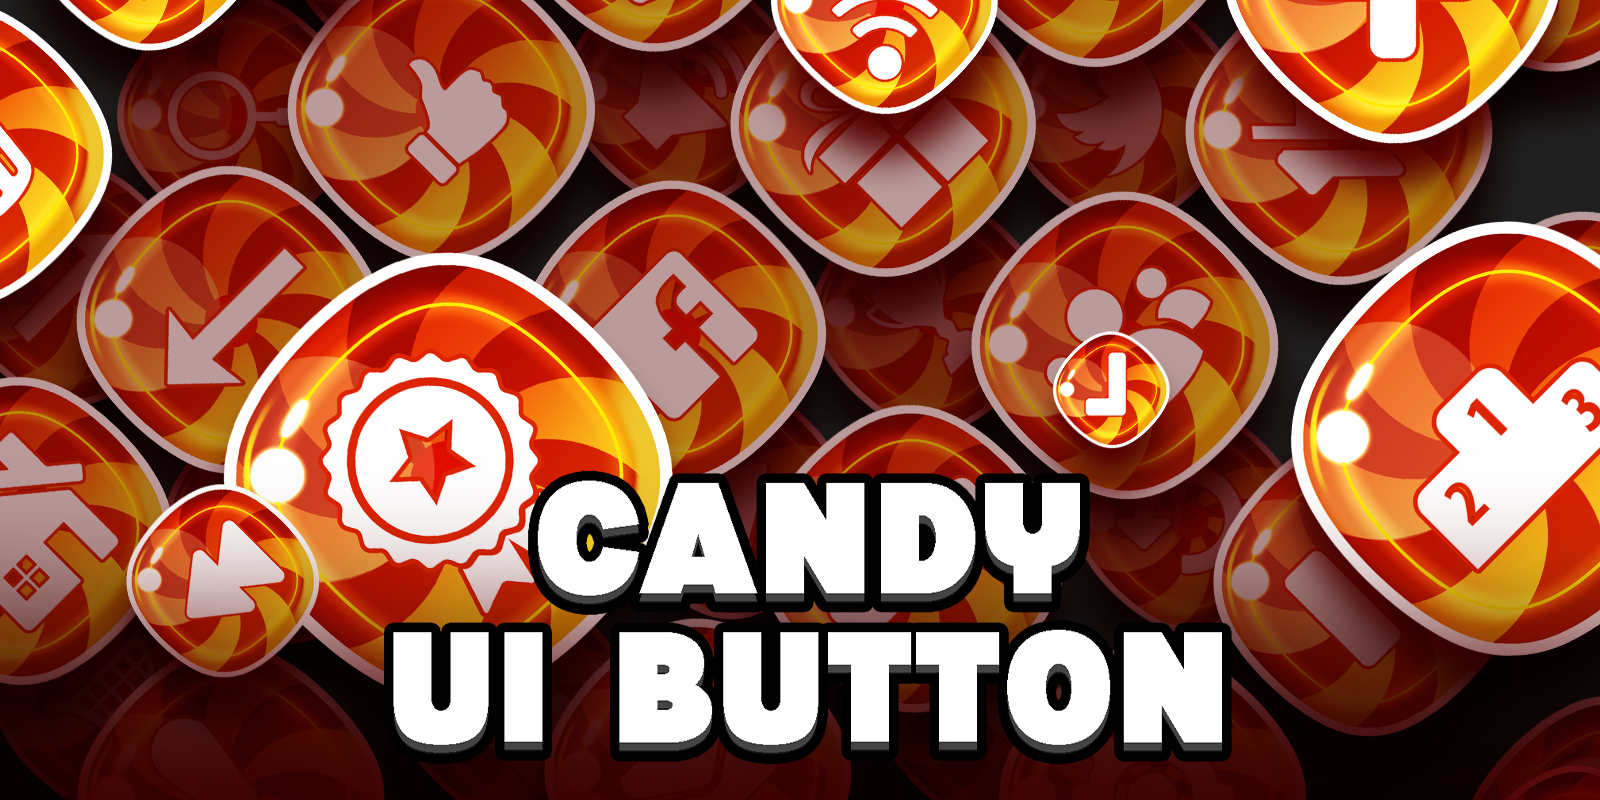 Candy UI Button #2